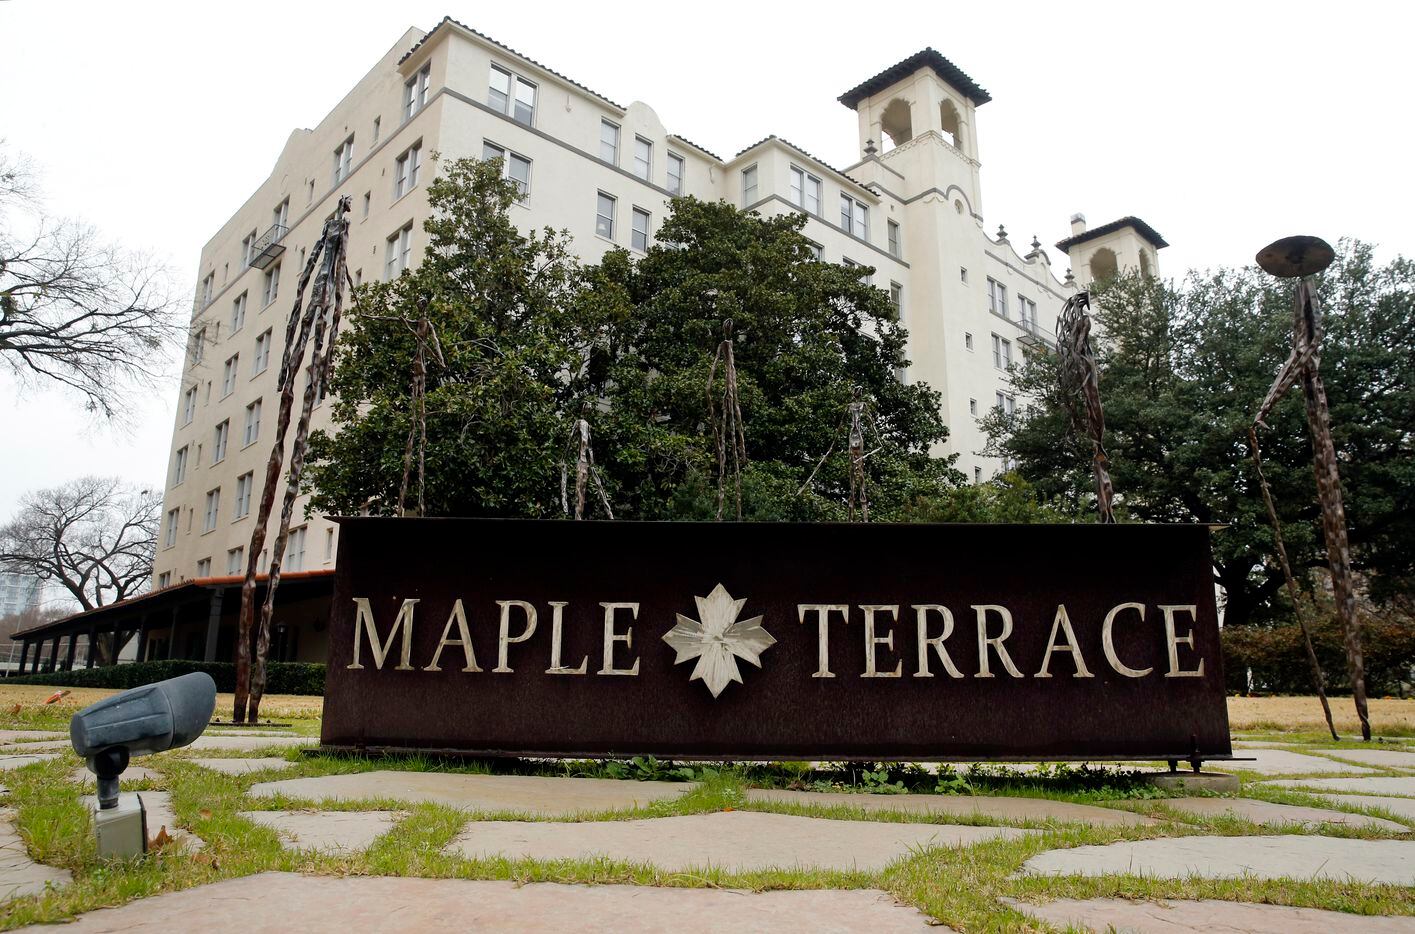 The landmark Maple Terrace, a historical apartment building in Uptown area of Dallas, is...